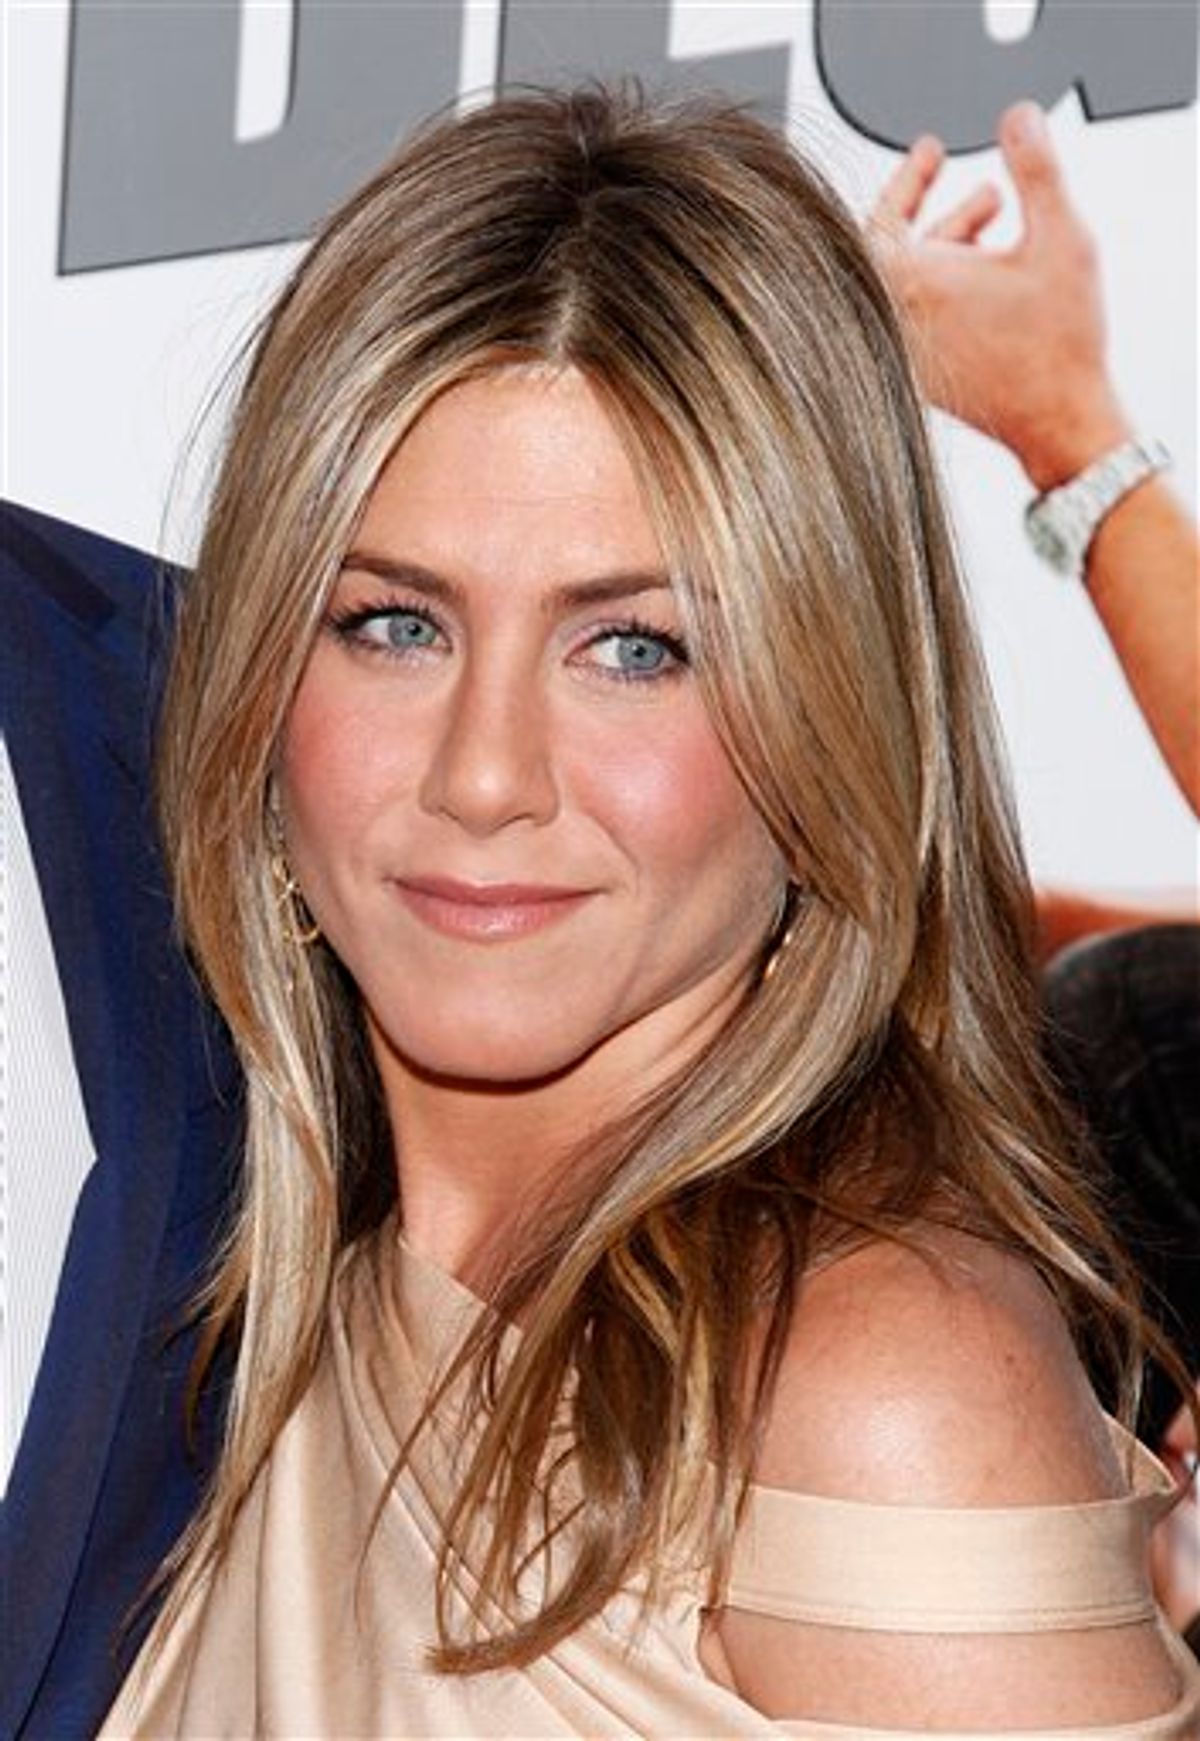 FILE - In this March 16, 2010 file photo, Jennifer Aniston arrives to the premiere of "The Bounty Hunter" at The Ziegfeld Theater in New York. (AP Photo/Peter Kramer, file) (AP)